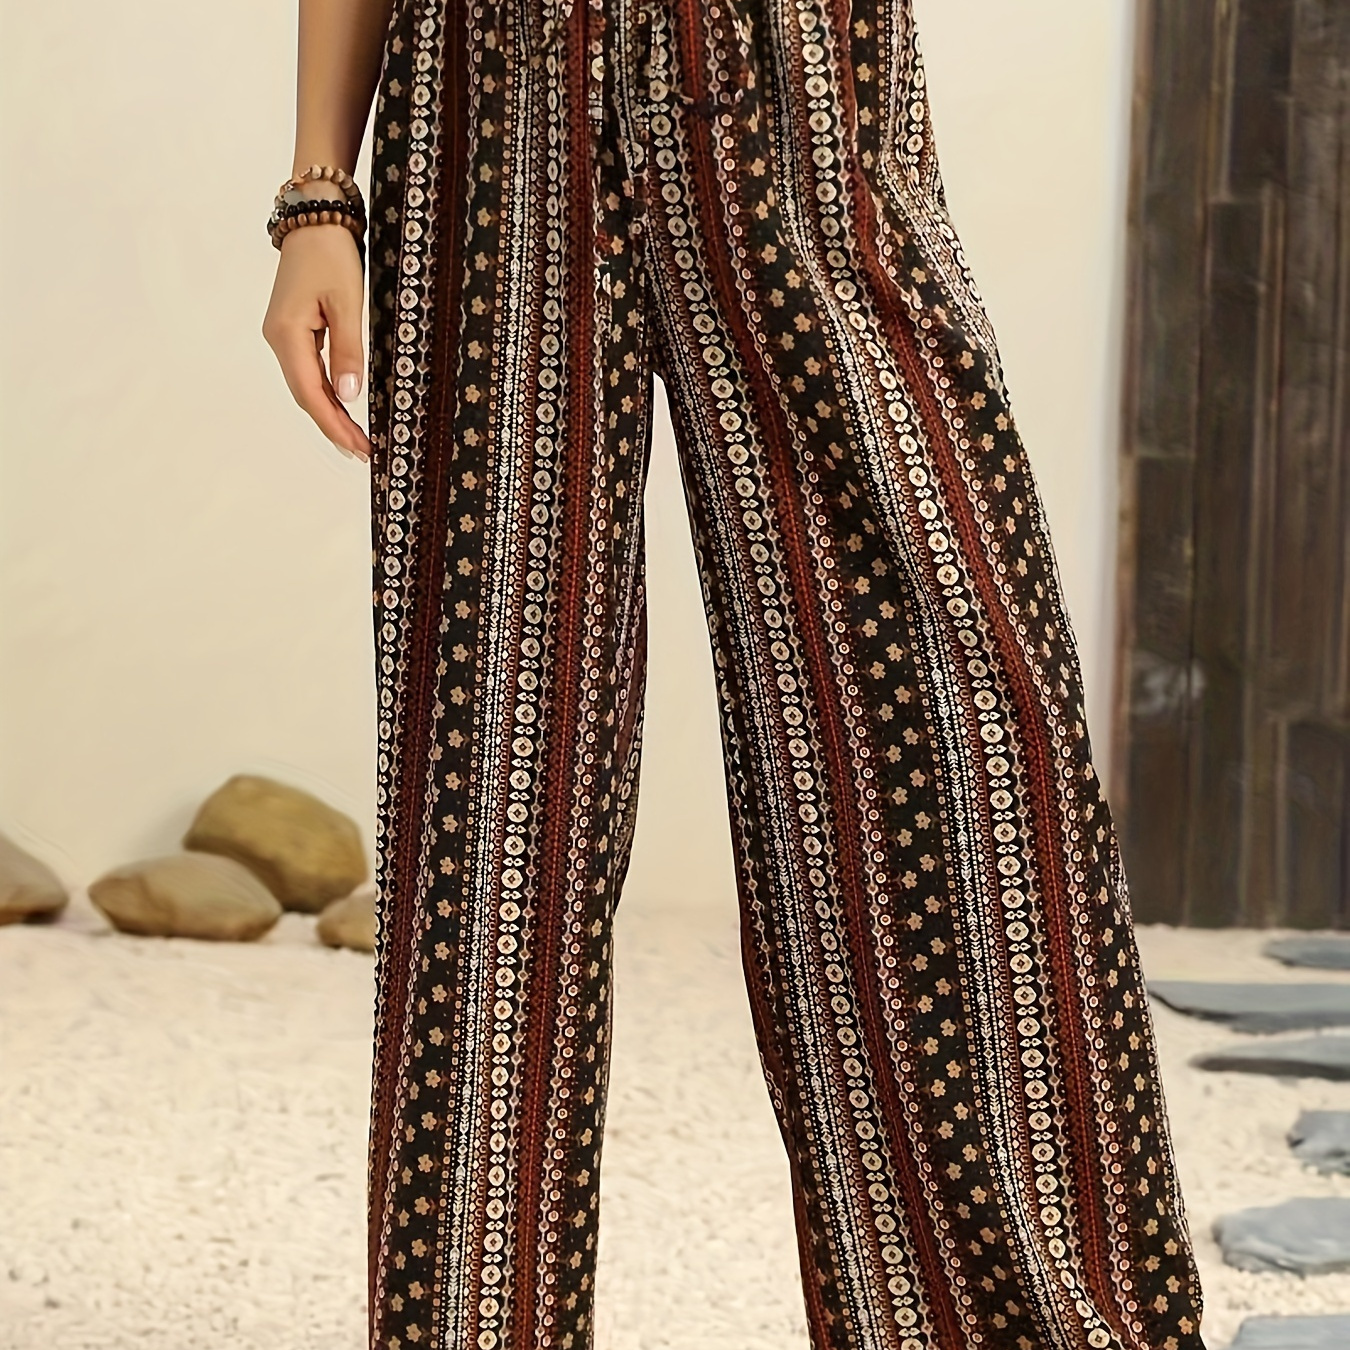 

Bohemian Print High Waist Drawstring Wide Leg Palazzo Pants, Women's Casual Loose-fit Summer Trousers With Elastic Waistband, Comfortable Jogger Style